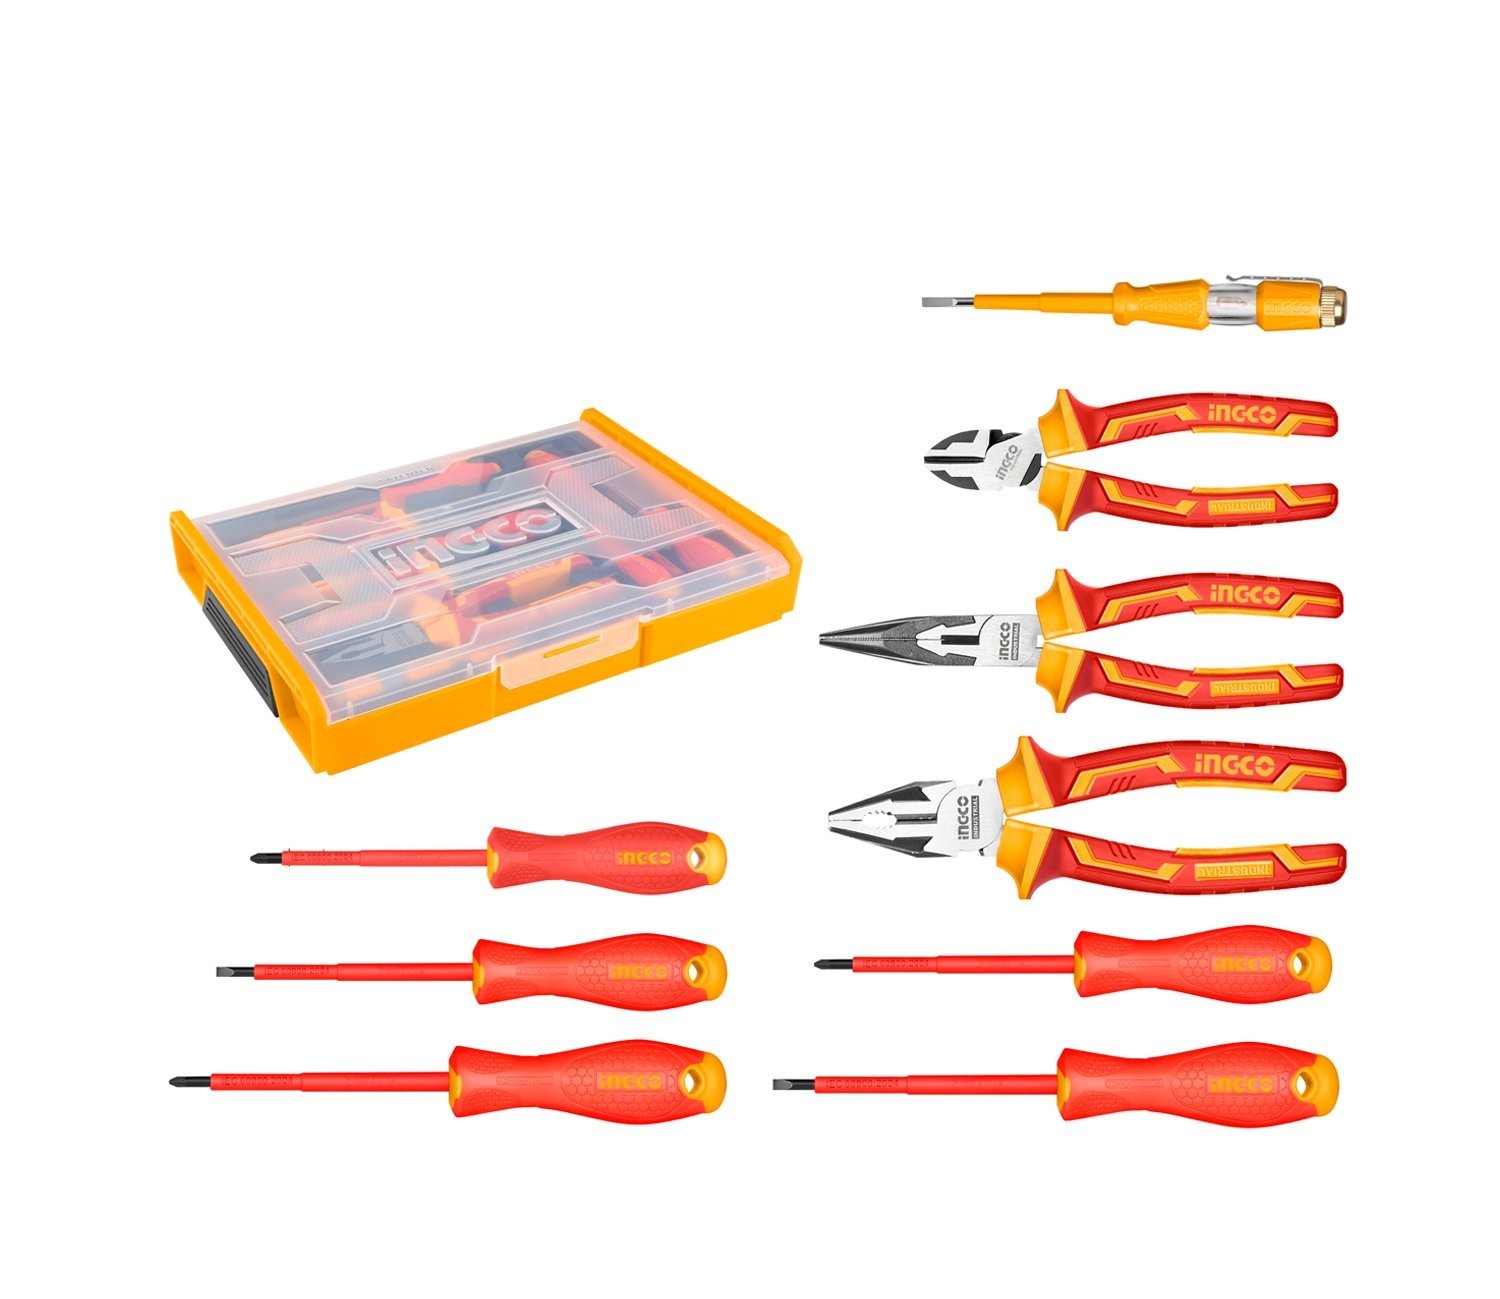 Ingco 9 Pieces Insulated Hand Tools Set - HKTV01H091 | Supply Master | Accra, Ghana Tools Building Steel Engineering Hardware tool